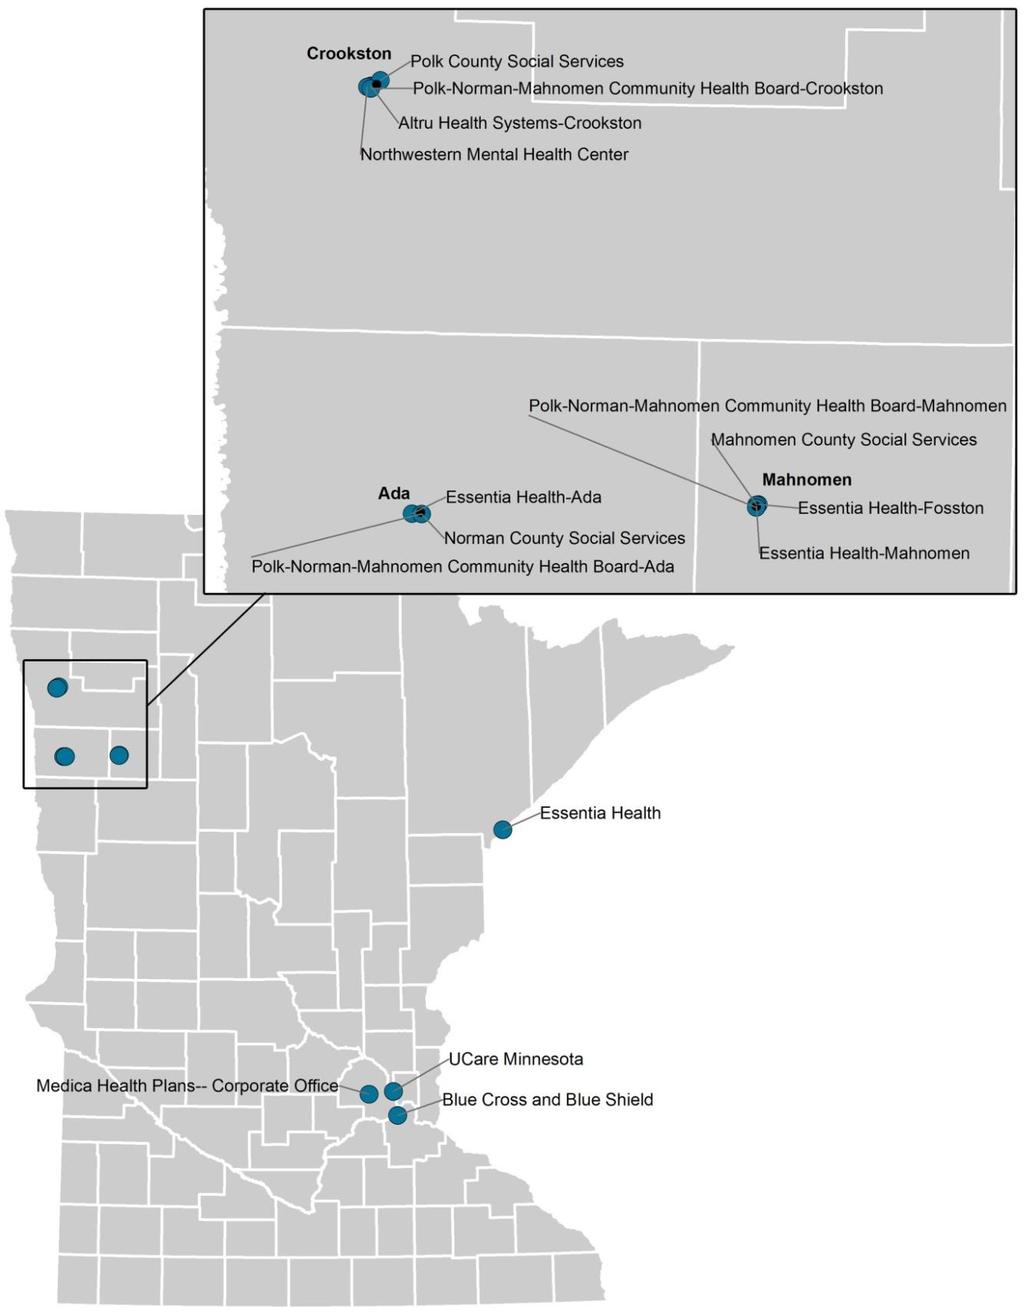 10. Northwest Minnesota e-health Collaborative Note: Plotted organizations may overlap because they are in close proximity.